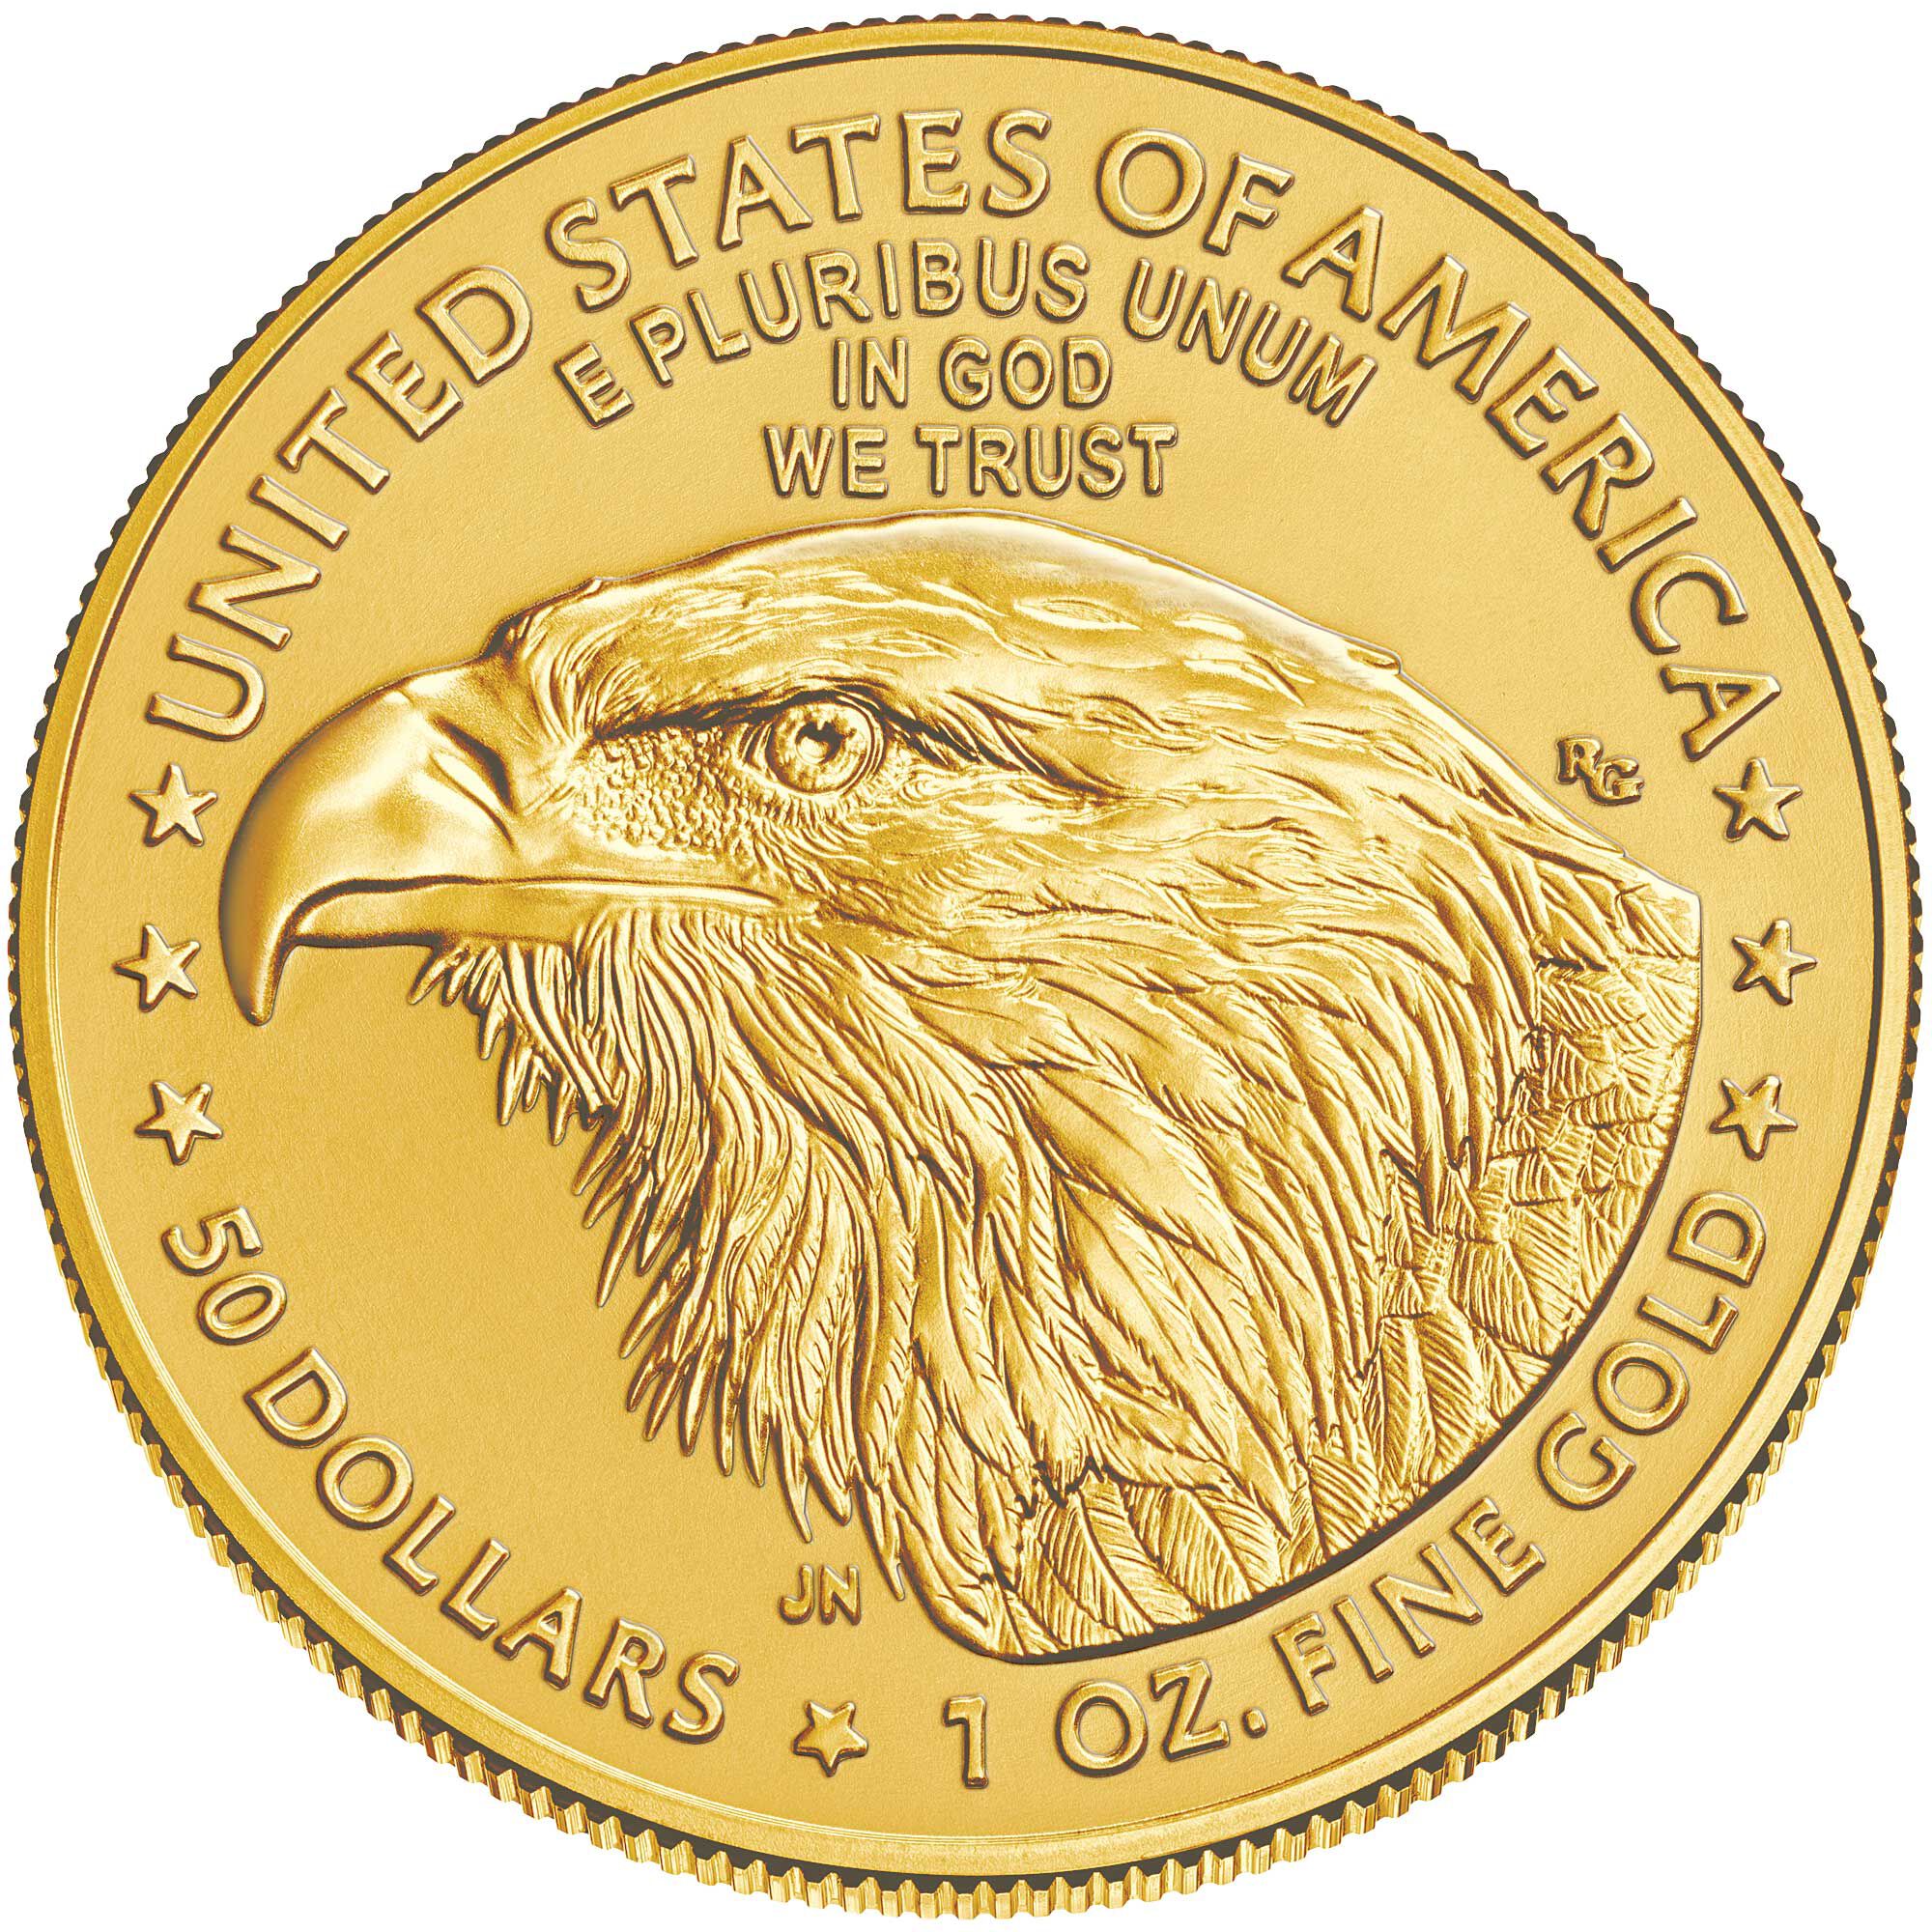 2023 earlyissue uncirculated american eagle gold coin GE3 b Coin